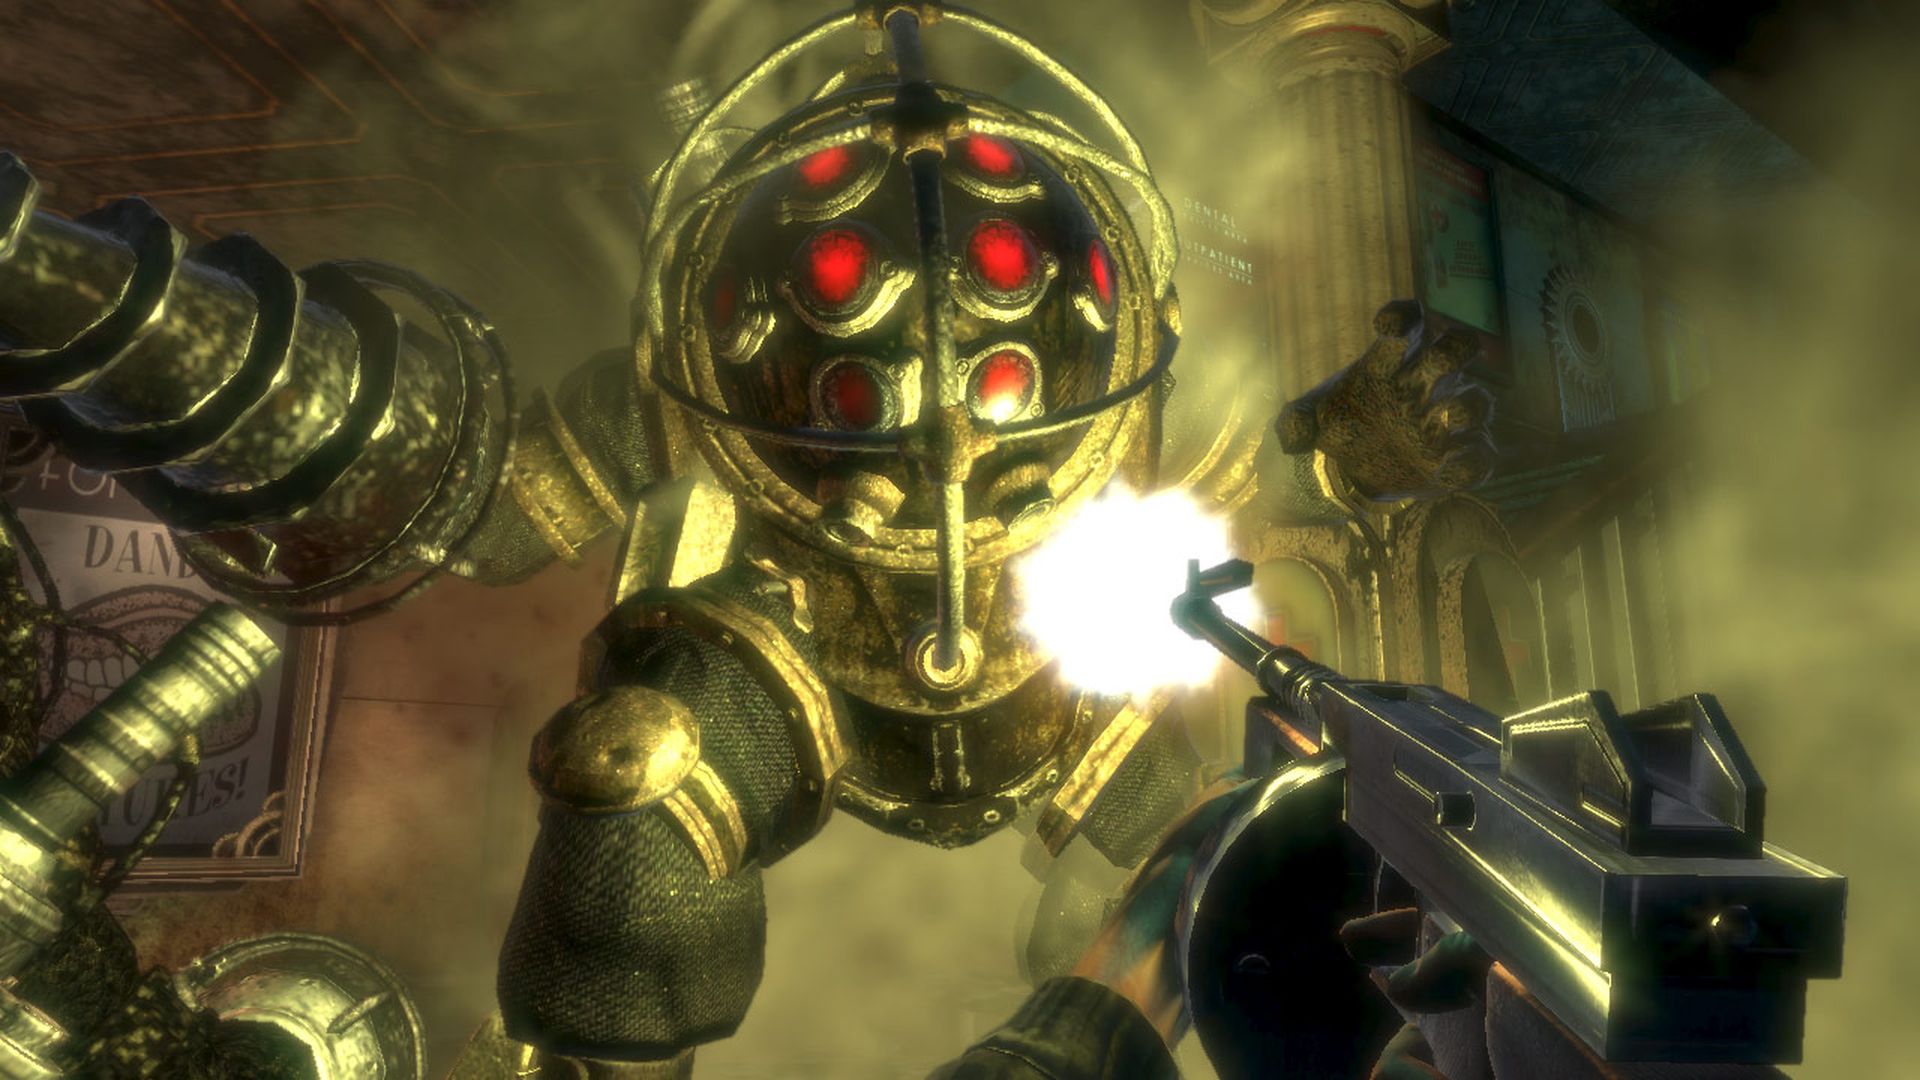 Video game screenshot of a person with a machine gun shooting at a monster that appears to be in an old diving suit